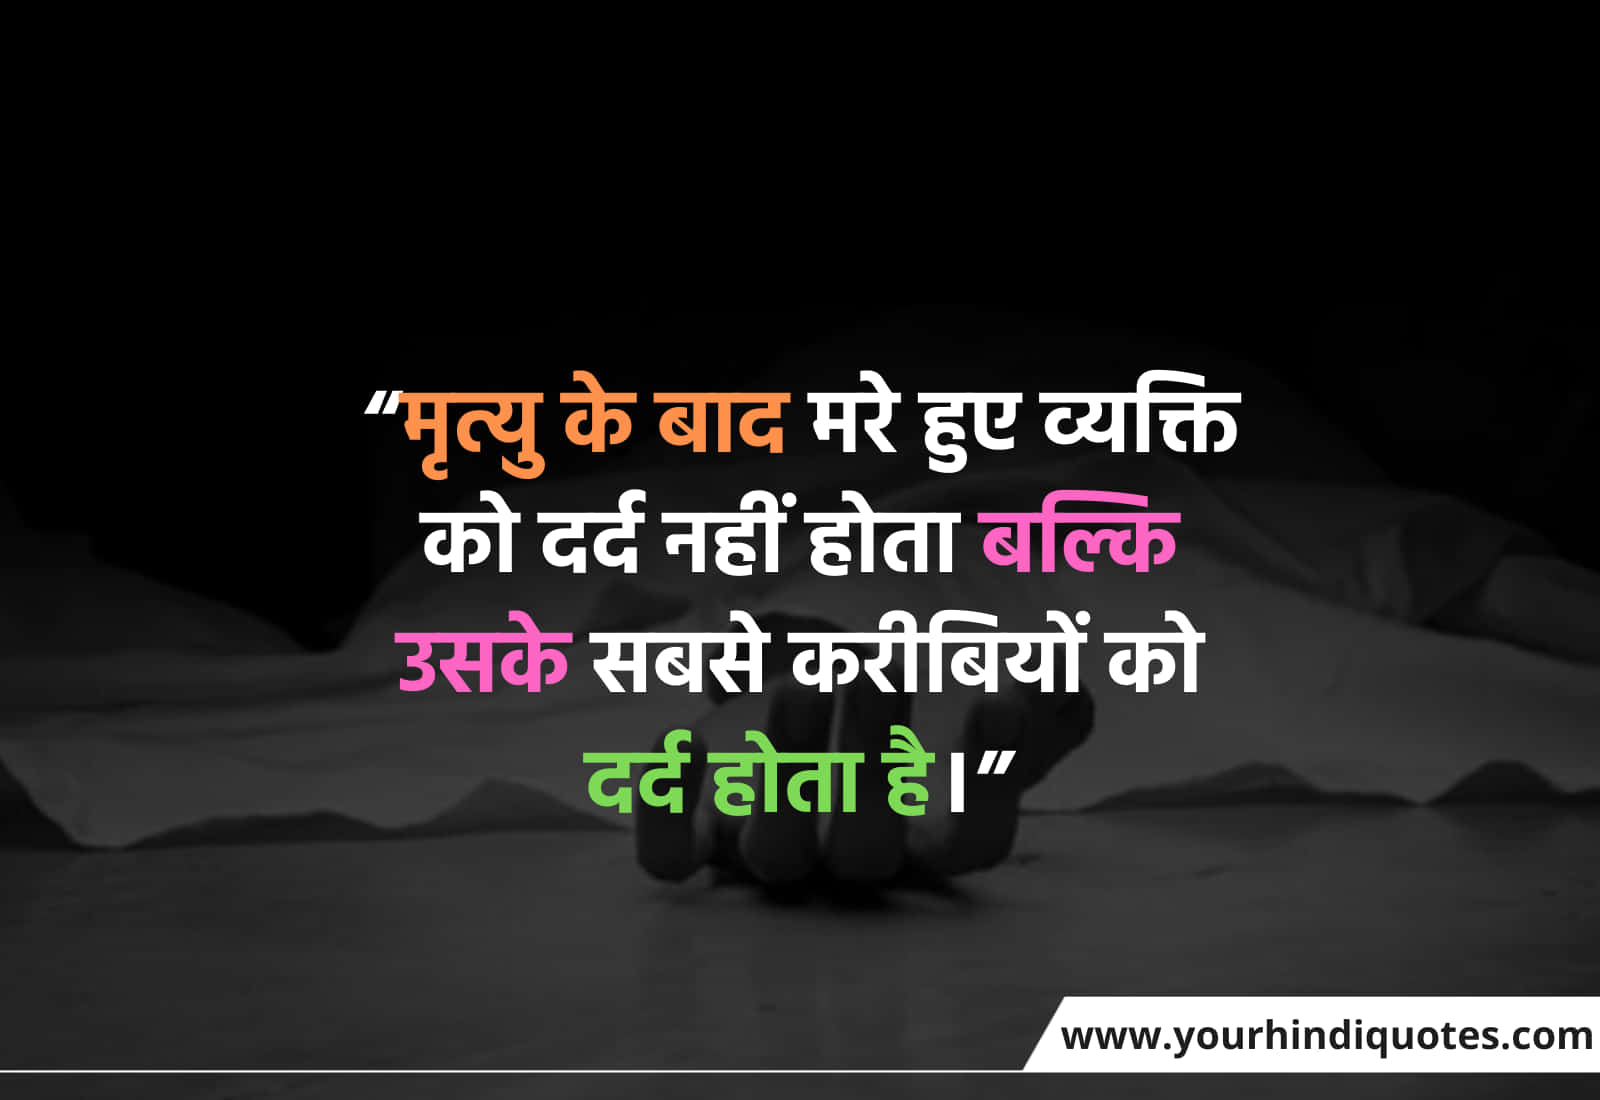 Sad Quotes for Death In Hindi